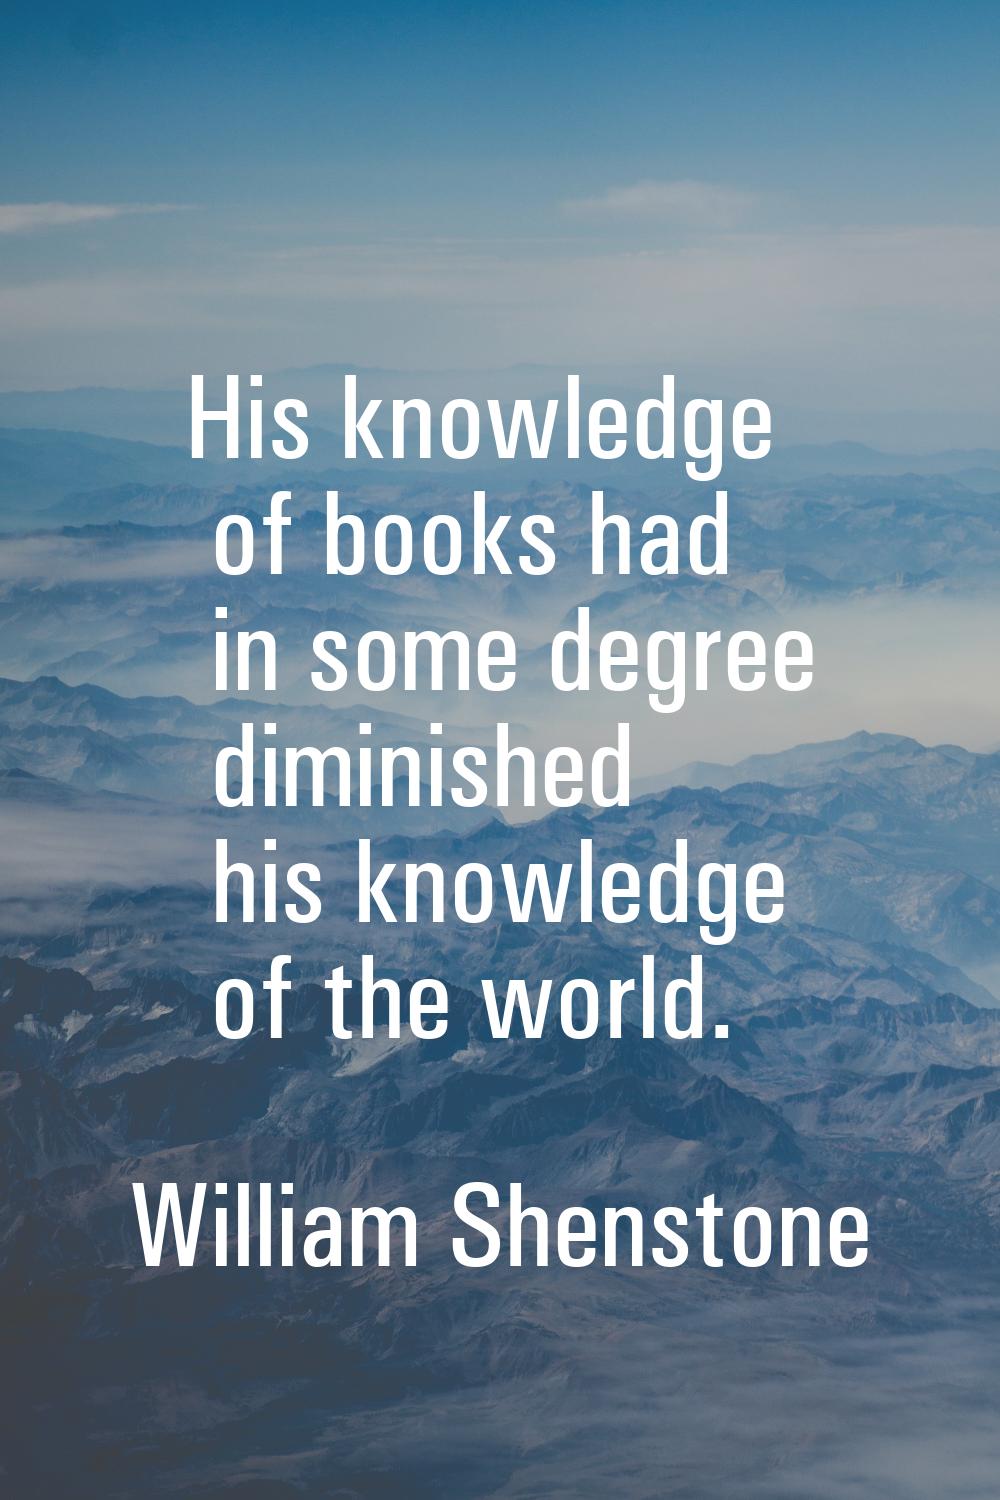 His knowledge of books had in some degree diminished his knowledge of the world.